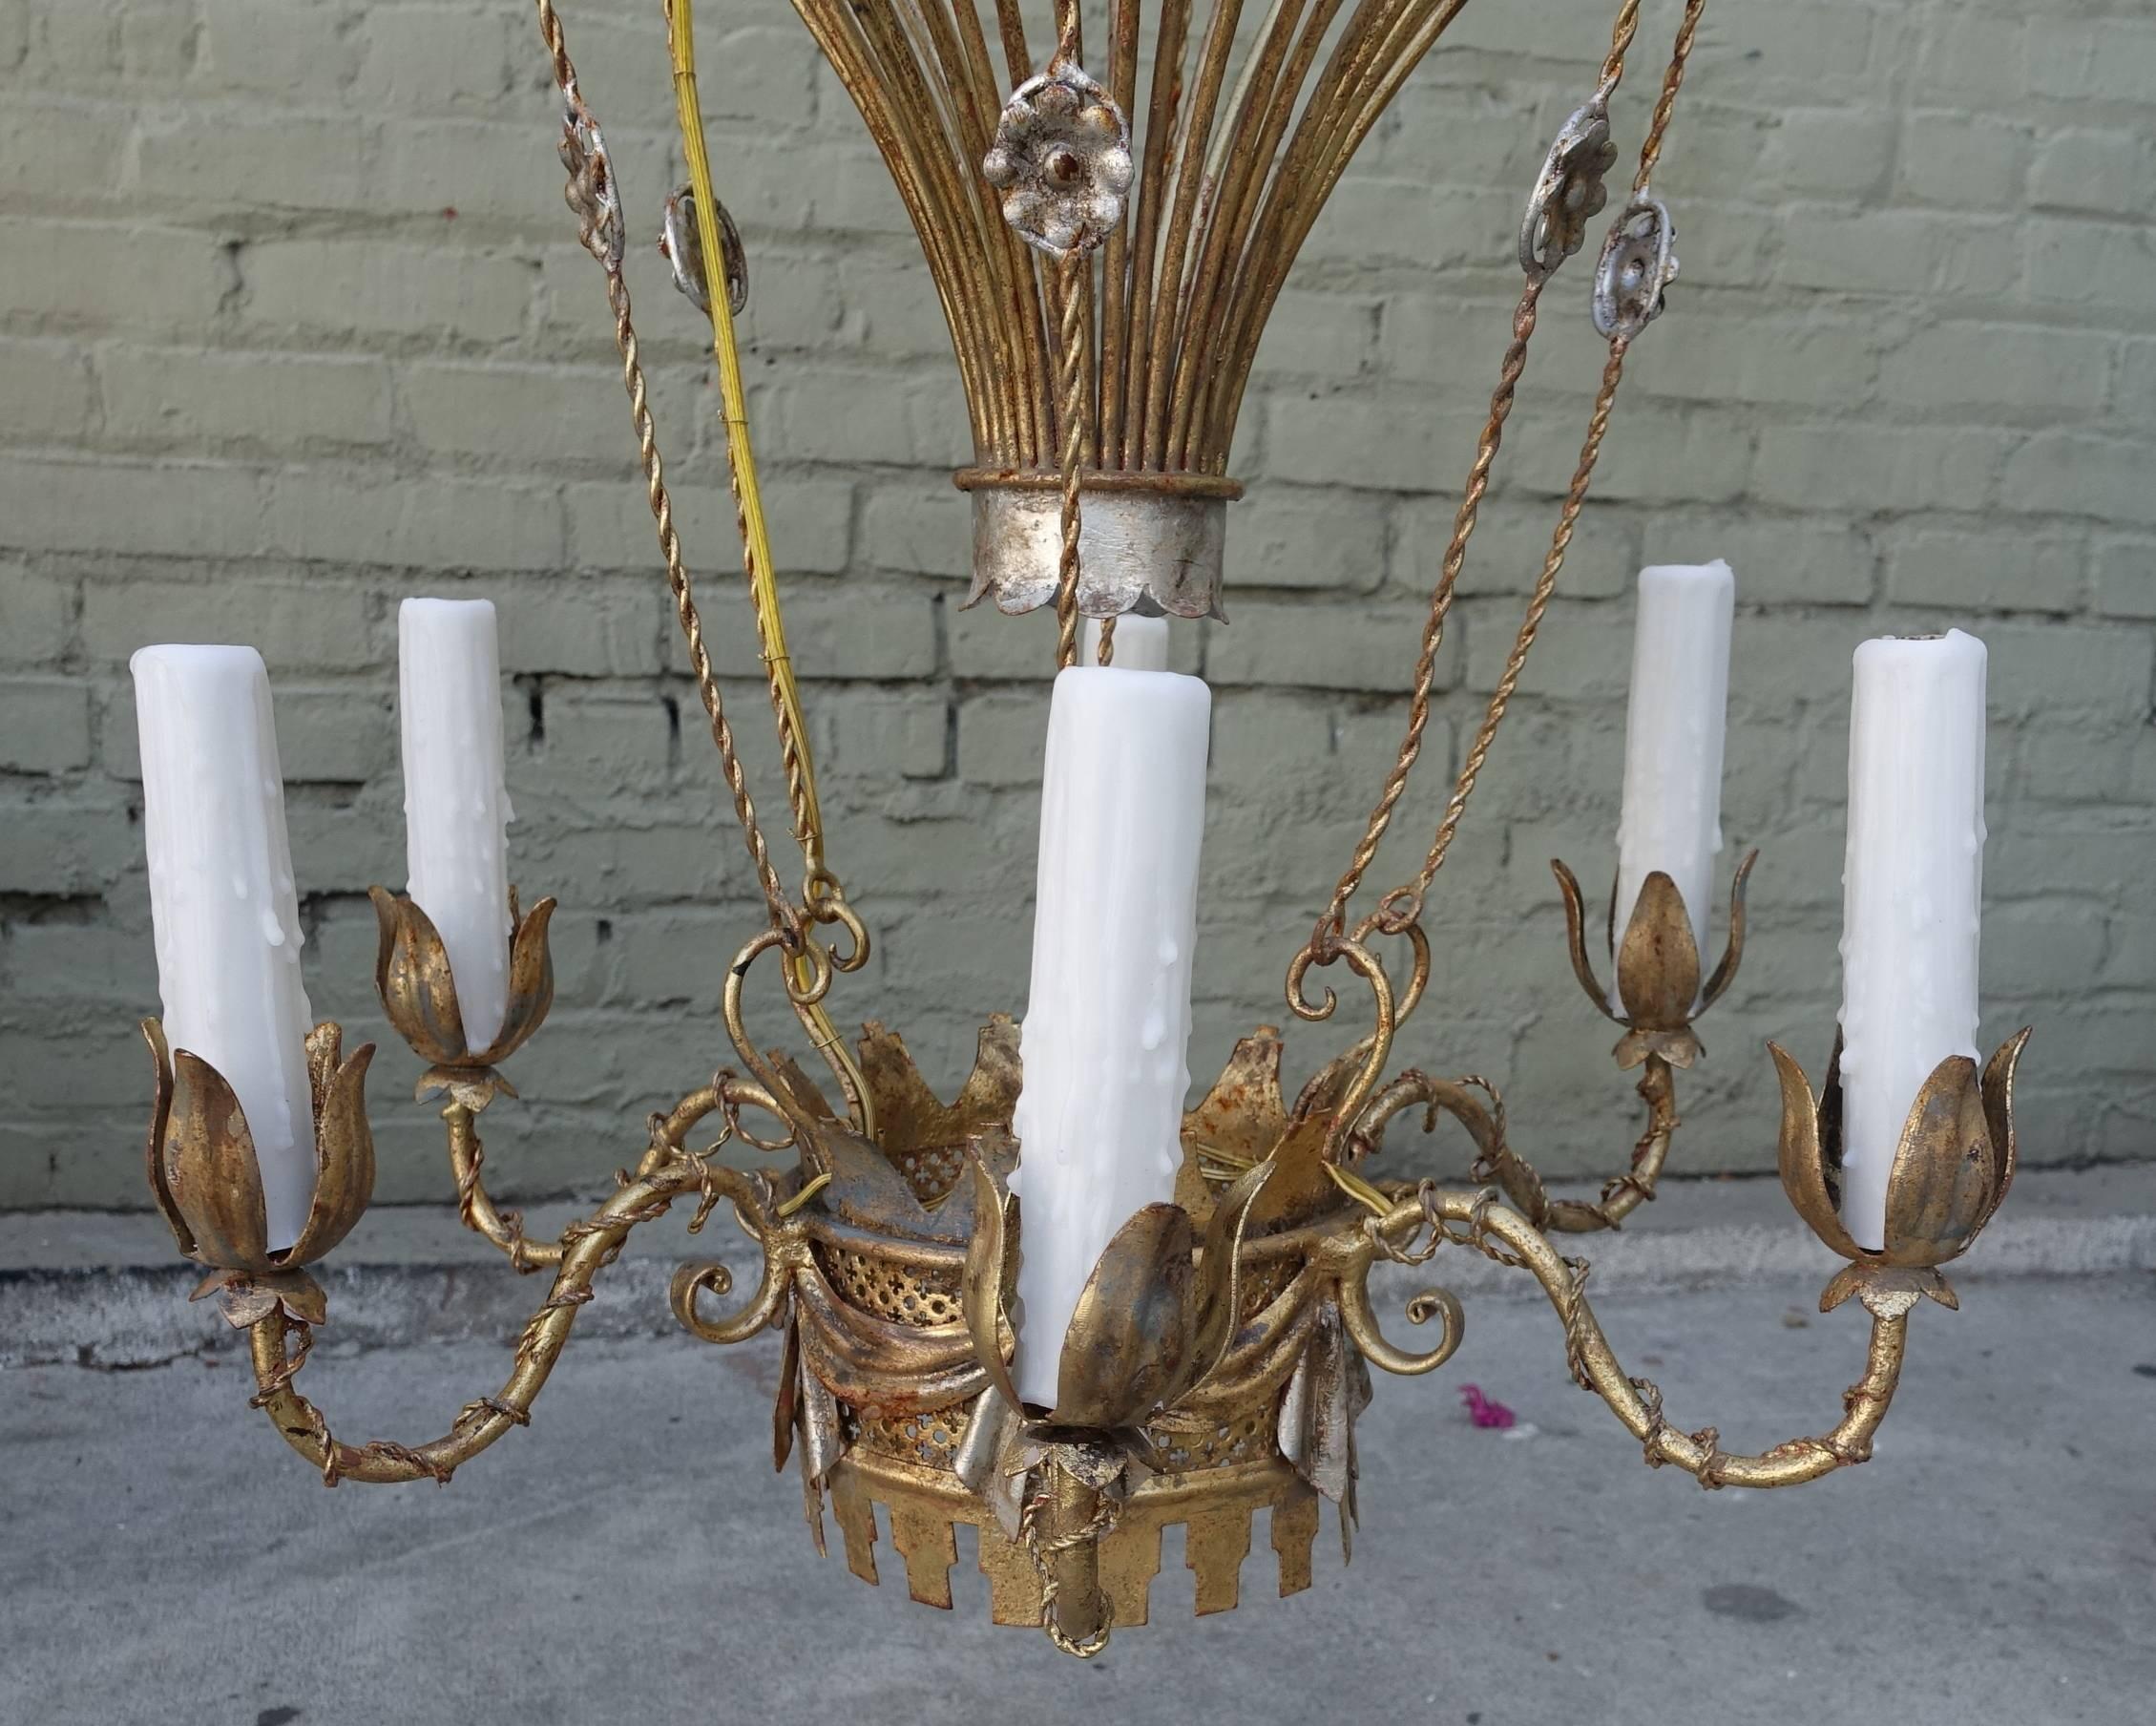 Six-light Italian gold and silver metal balloon chandelier with drip wax candle covers. Newly rewired and in working condition. Chain and canopy included.